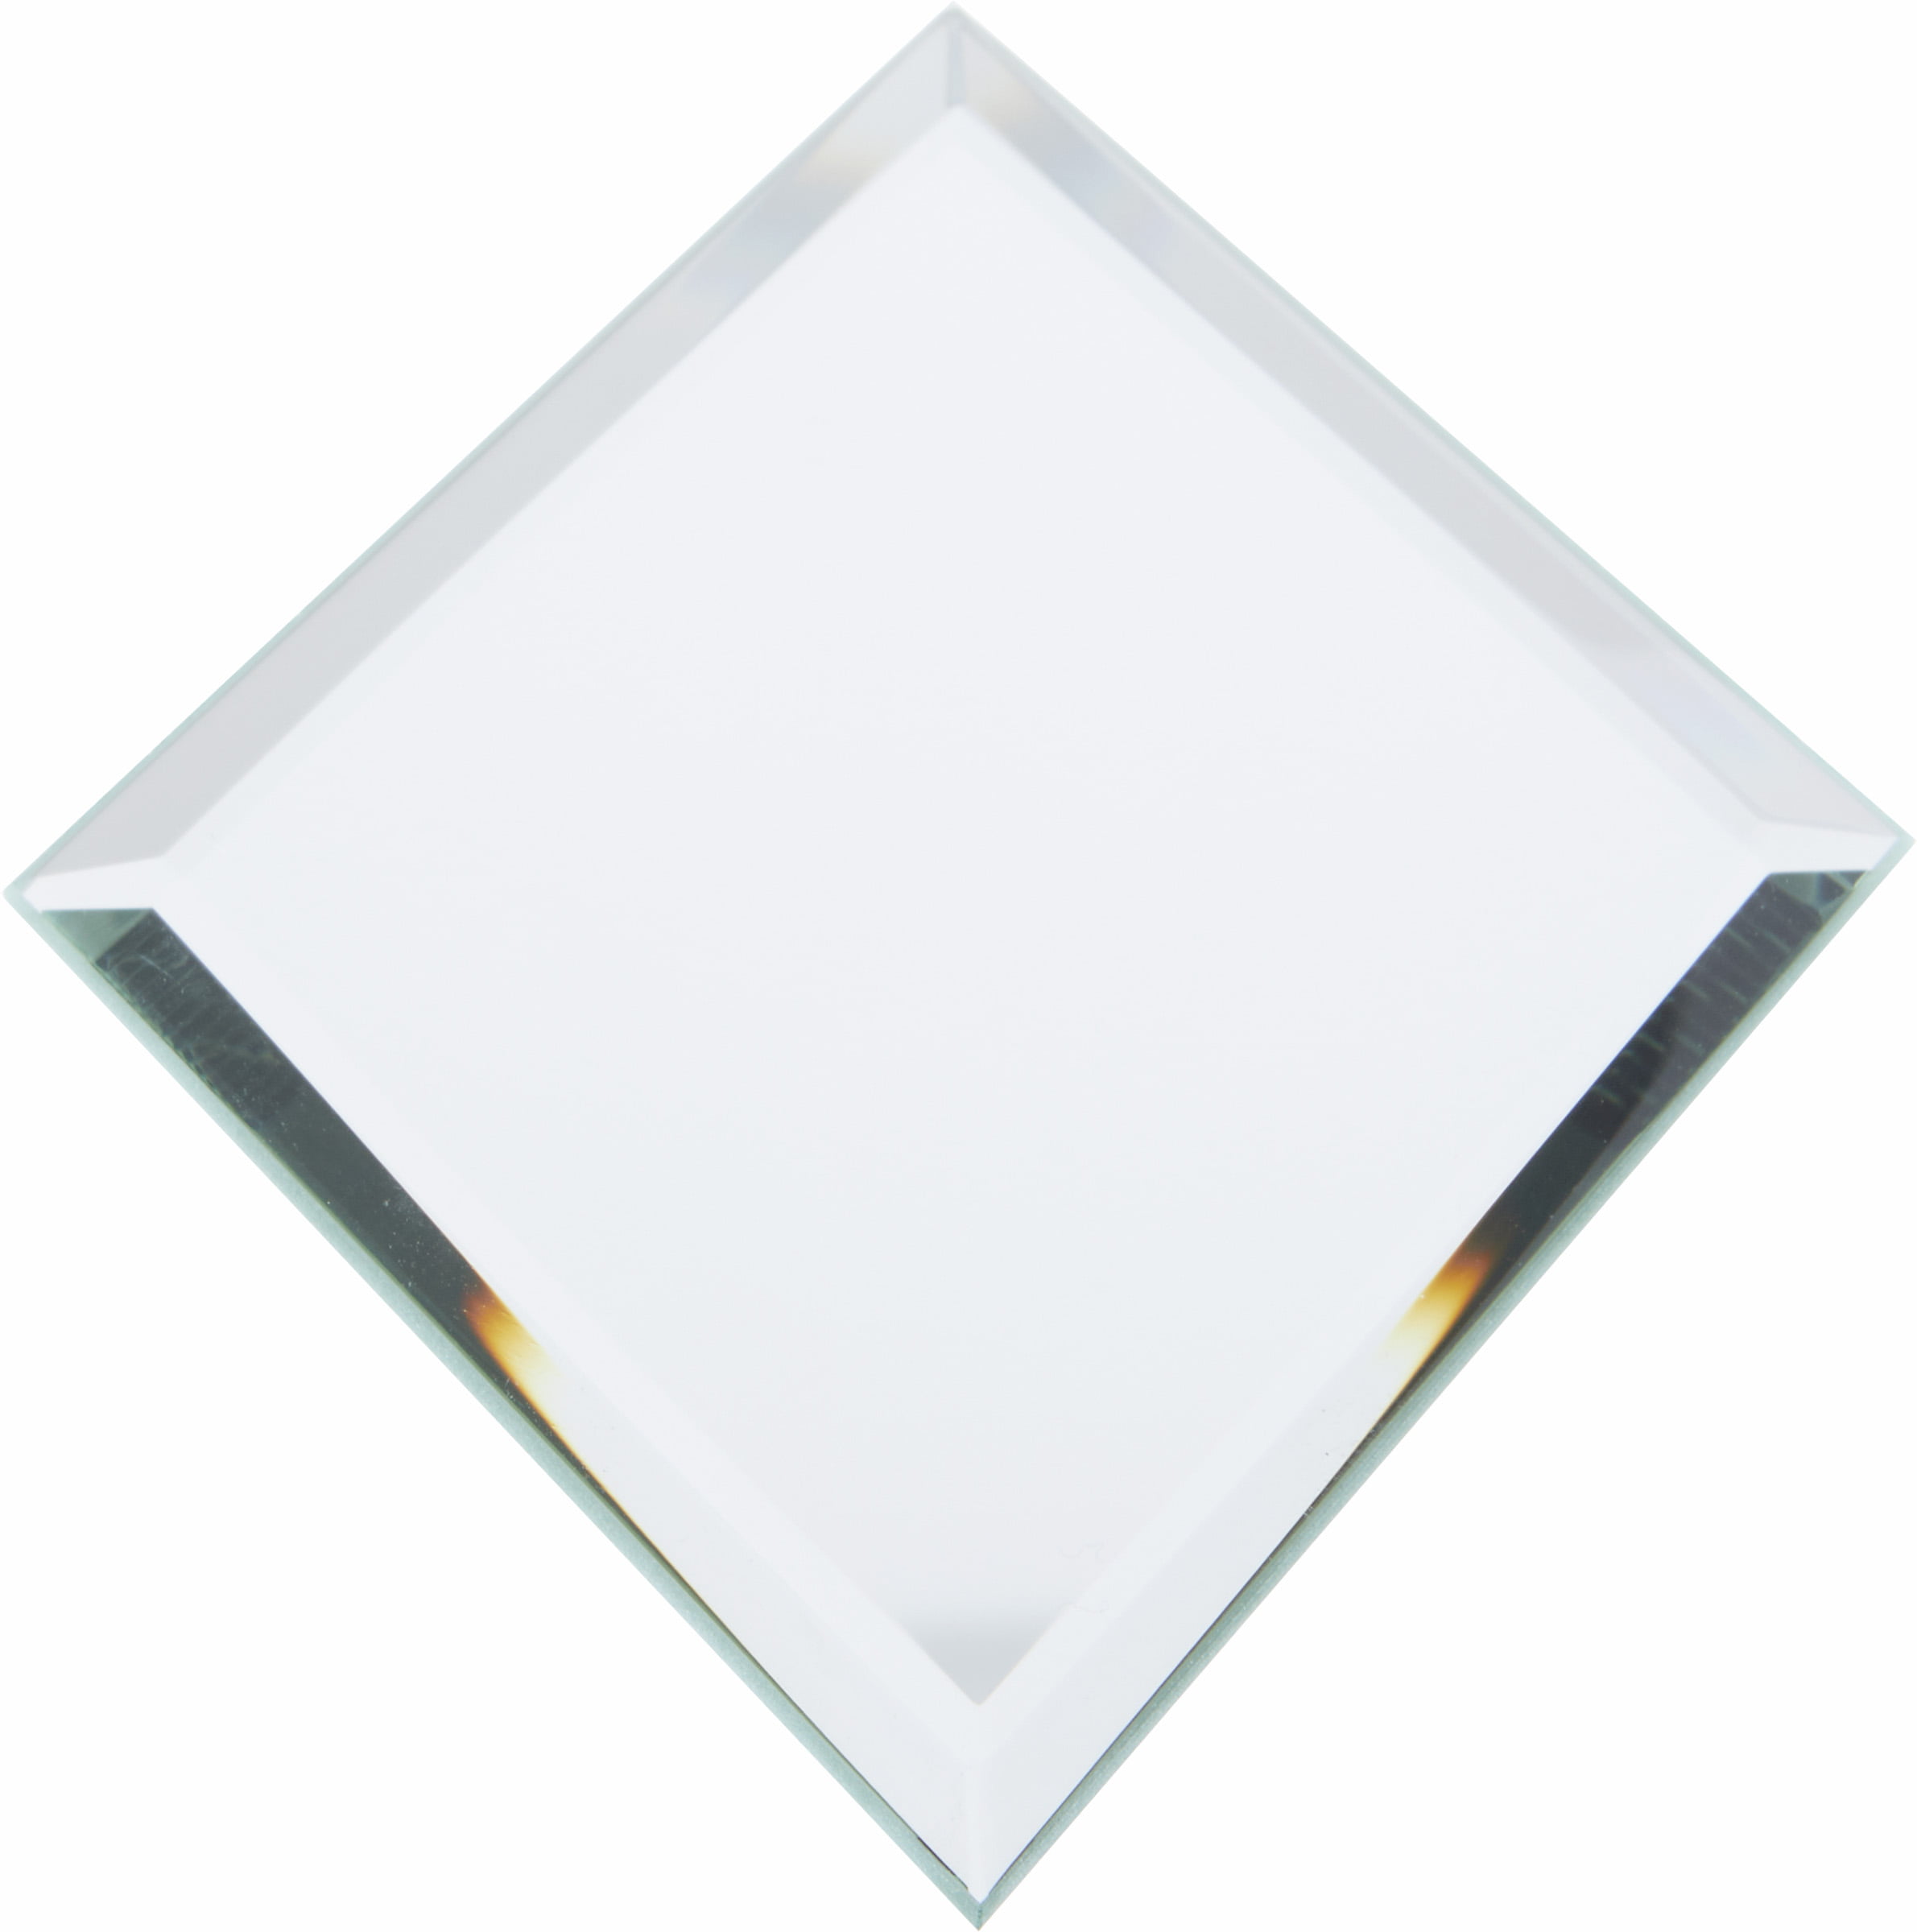 Plymor Rectangle 5mm Beveled Glass Mirror Pack of 2 9 inch x 15 inch 